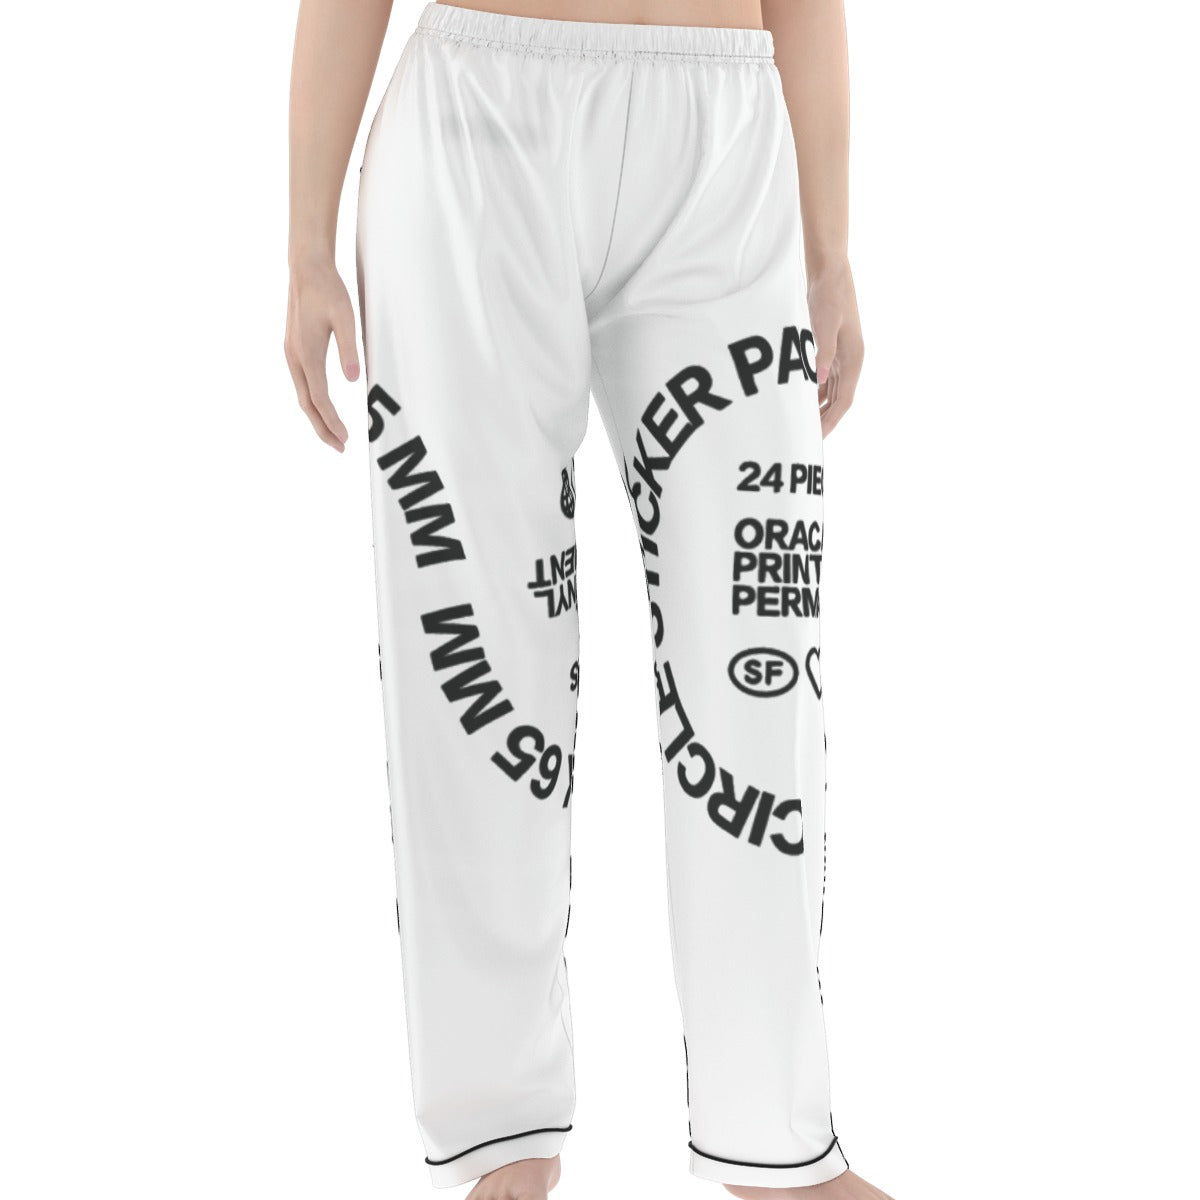 65mm Print All-over print Women'S Trousers Pajamas 2pc Set